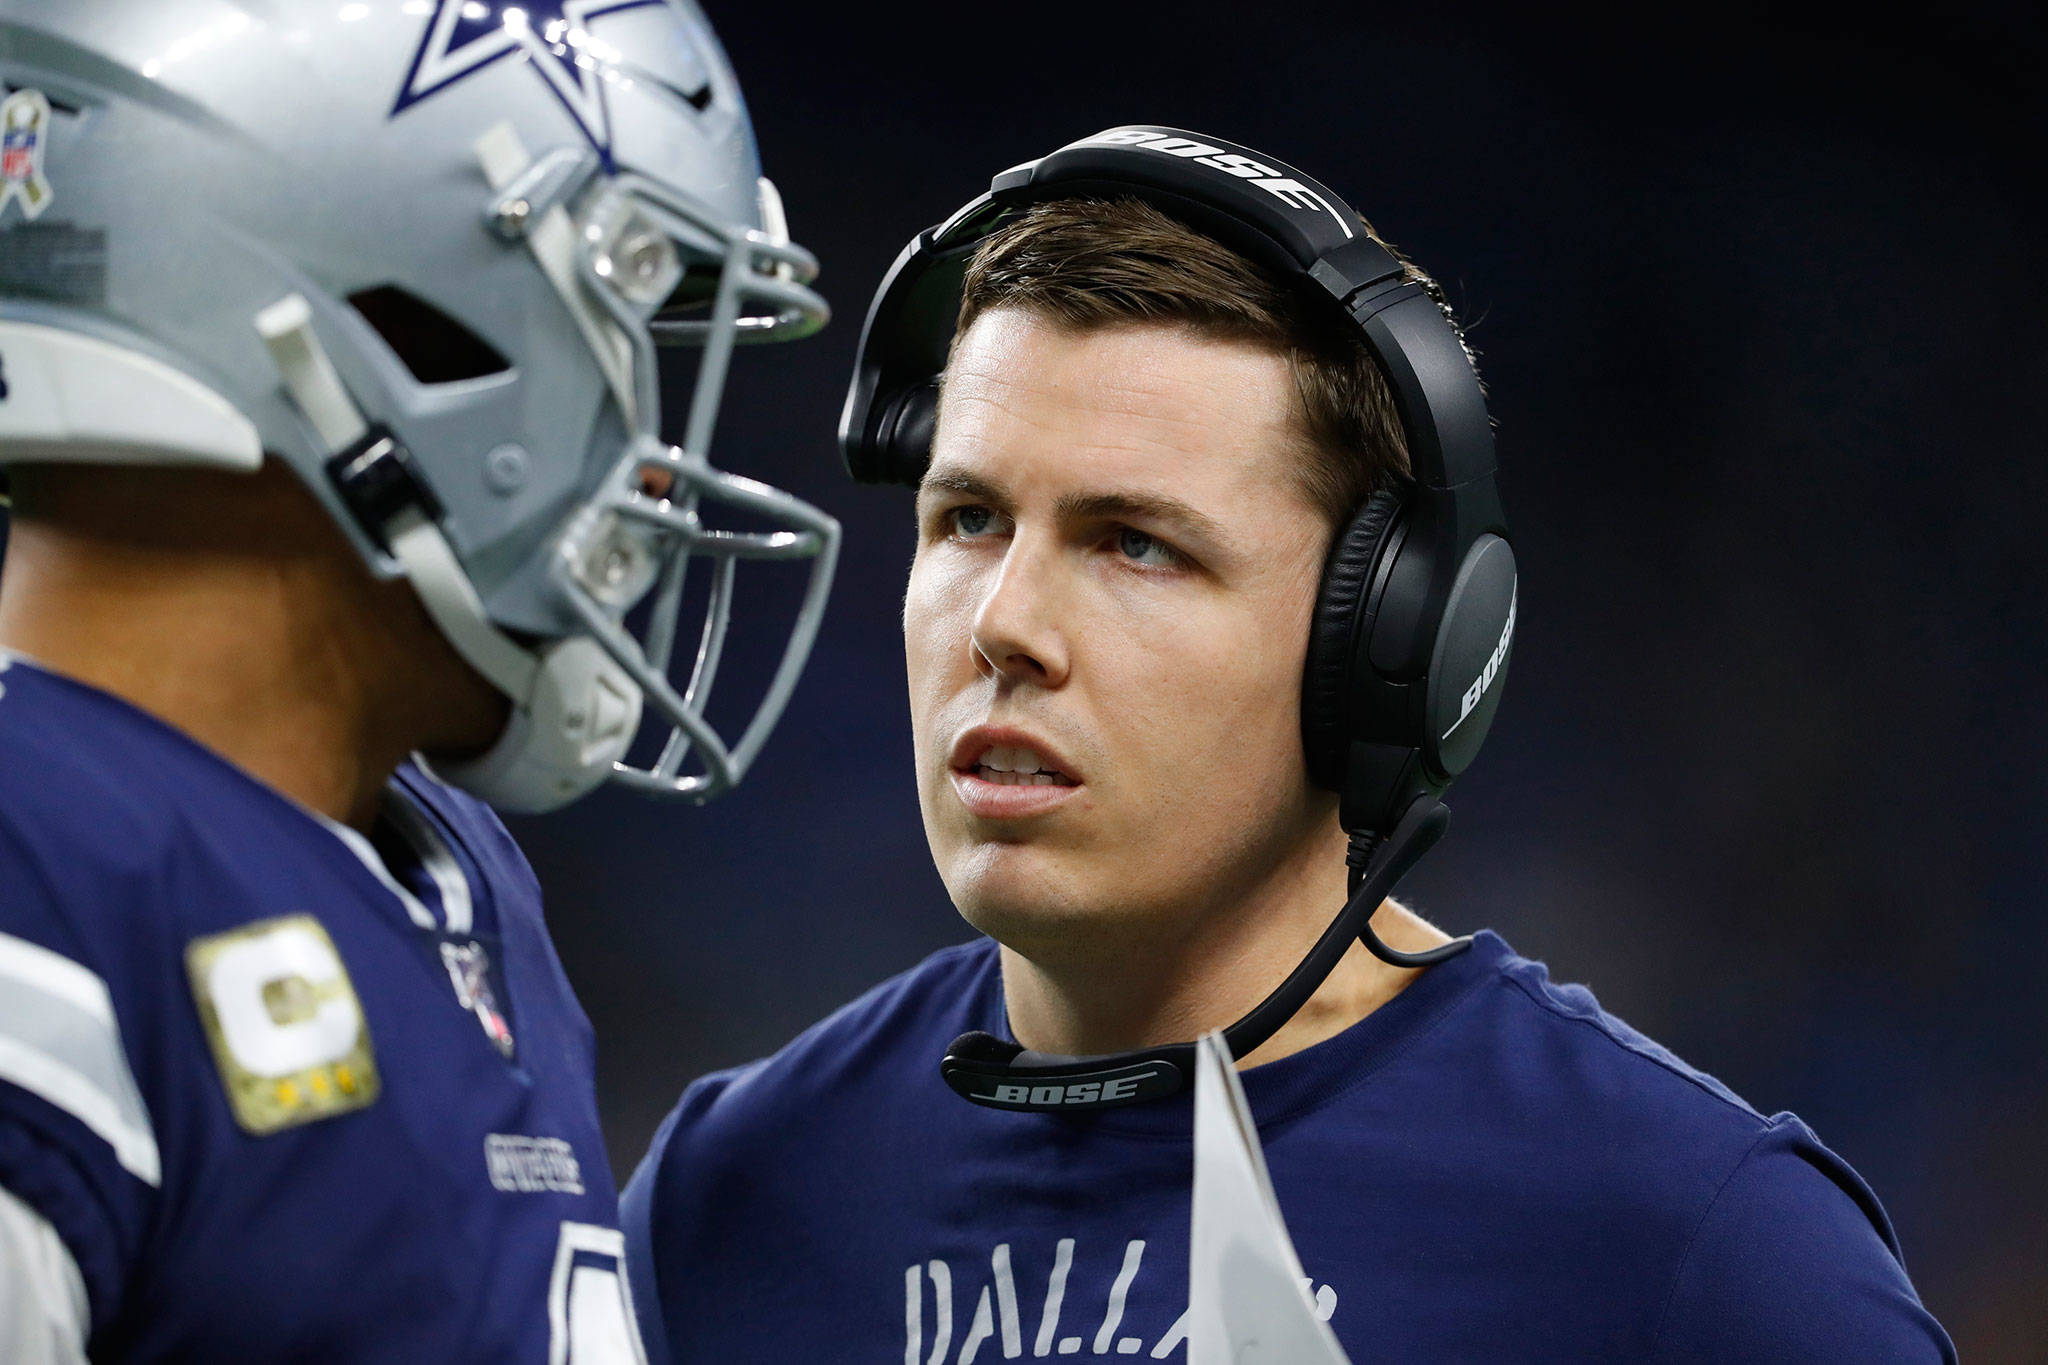 Cowboys offensive coordinator Kellen Moore, a Prosser High School alum, could be an option for the Huskies if Moore loses his job in Dallas. (AP Photo/Paul Sancya)